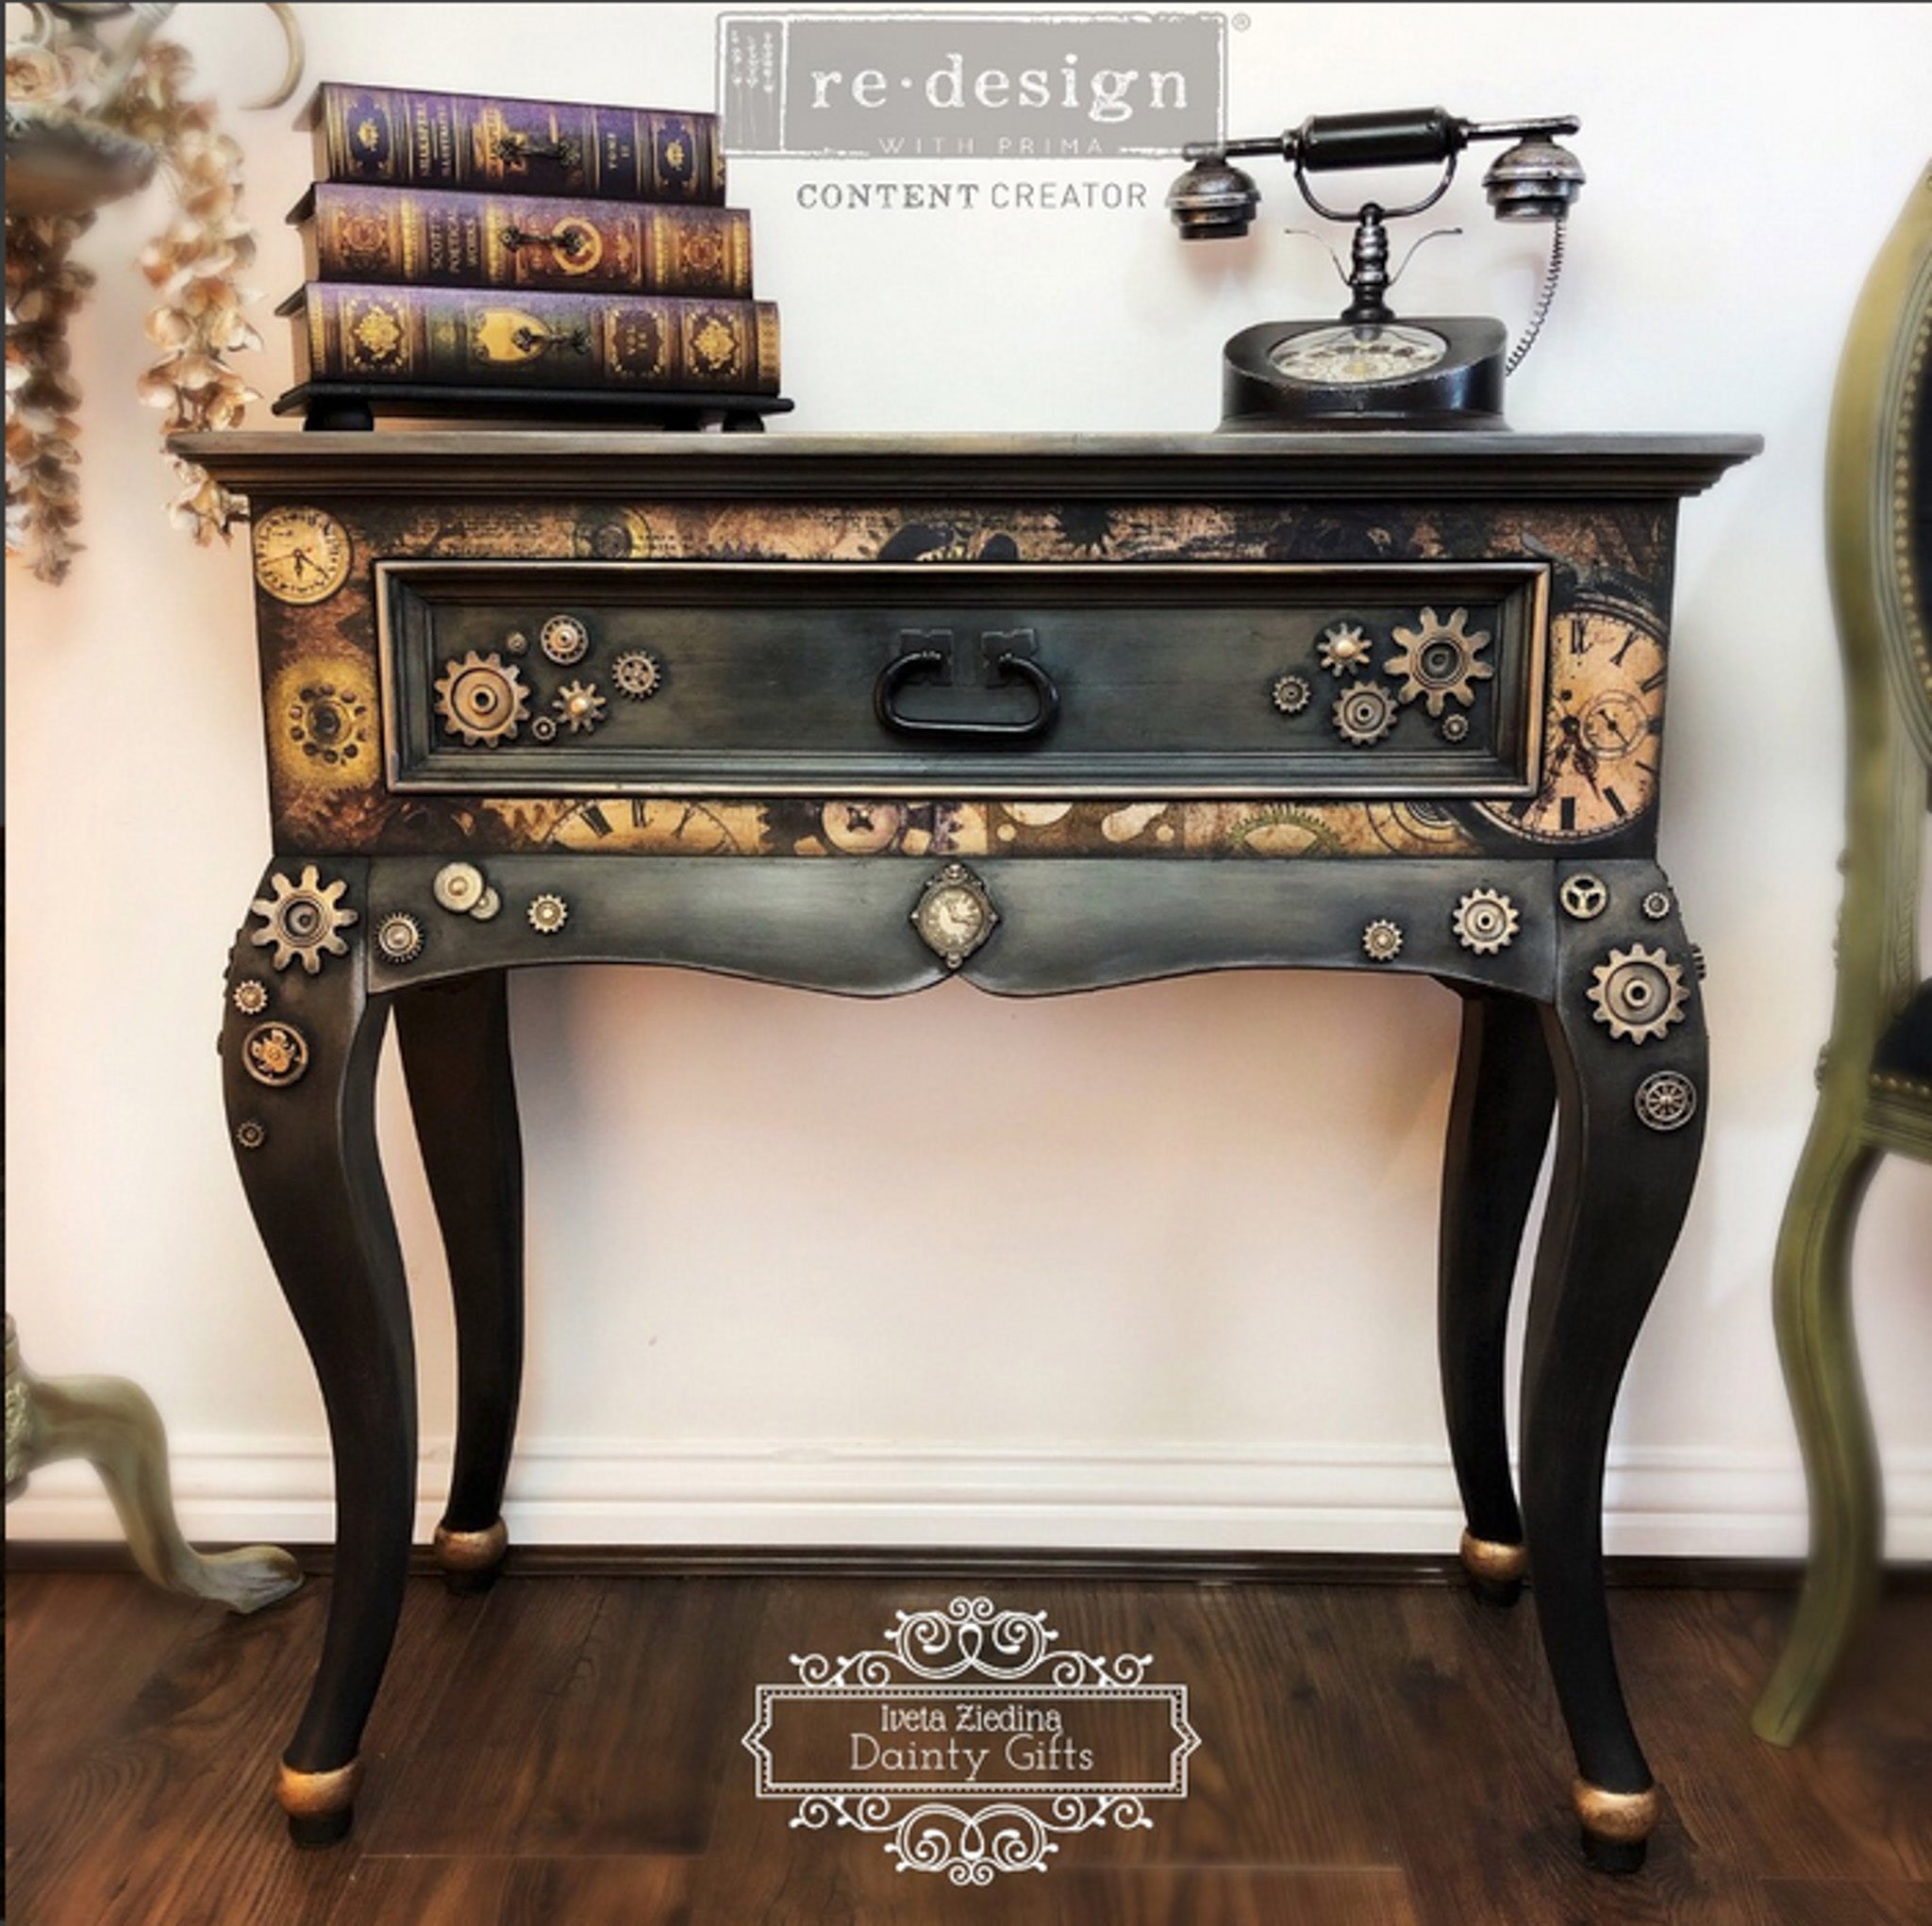 A vintage end table with 1 drawer refurbished by Iveta Ziedina Dainty Gifts is painted black and dark brown and features ReDesign with Prima's Timeworks tissue paper on it.